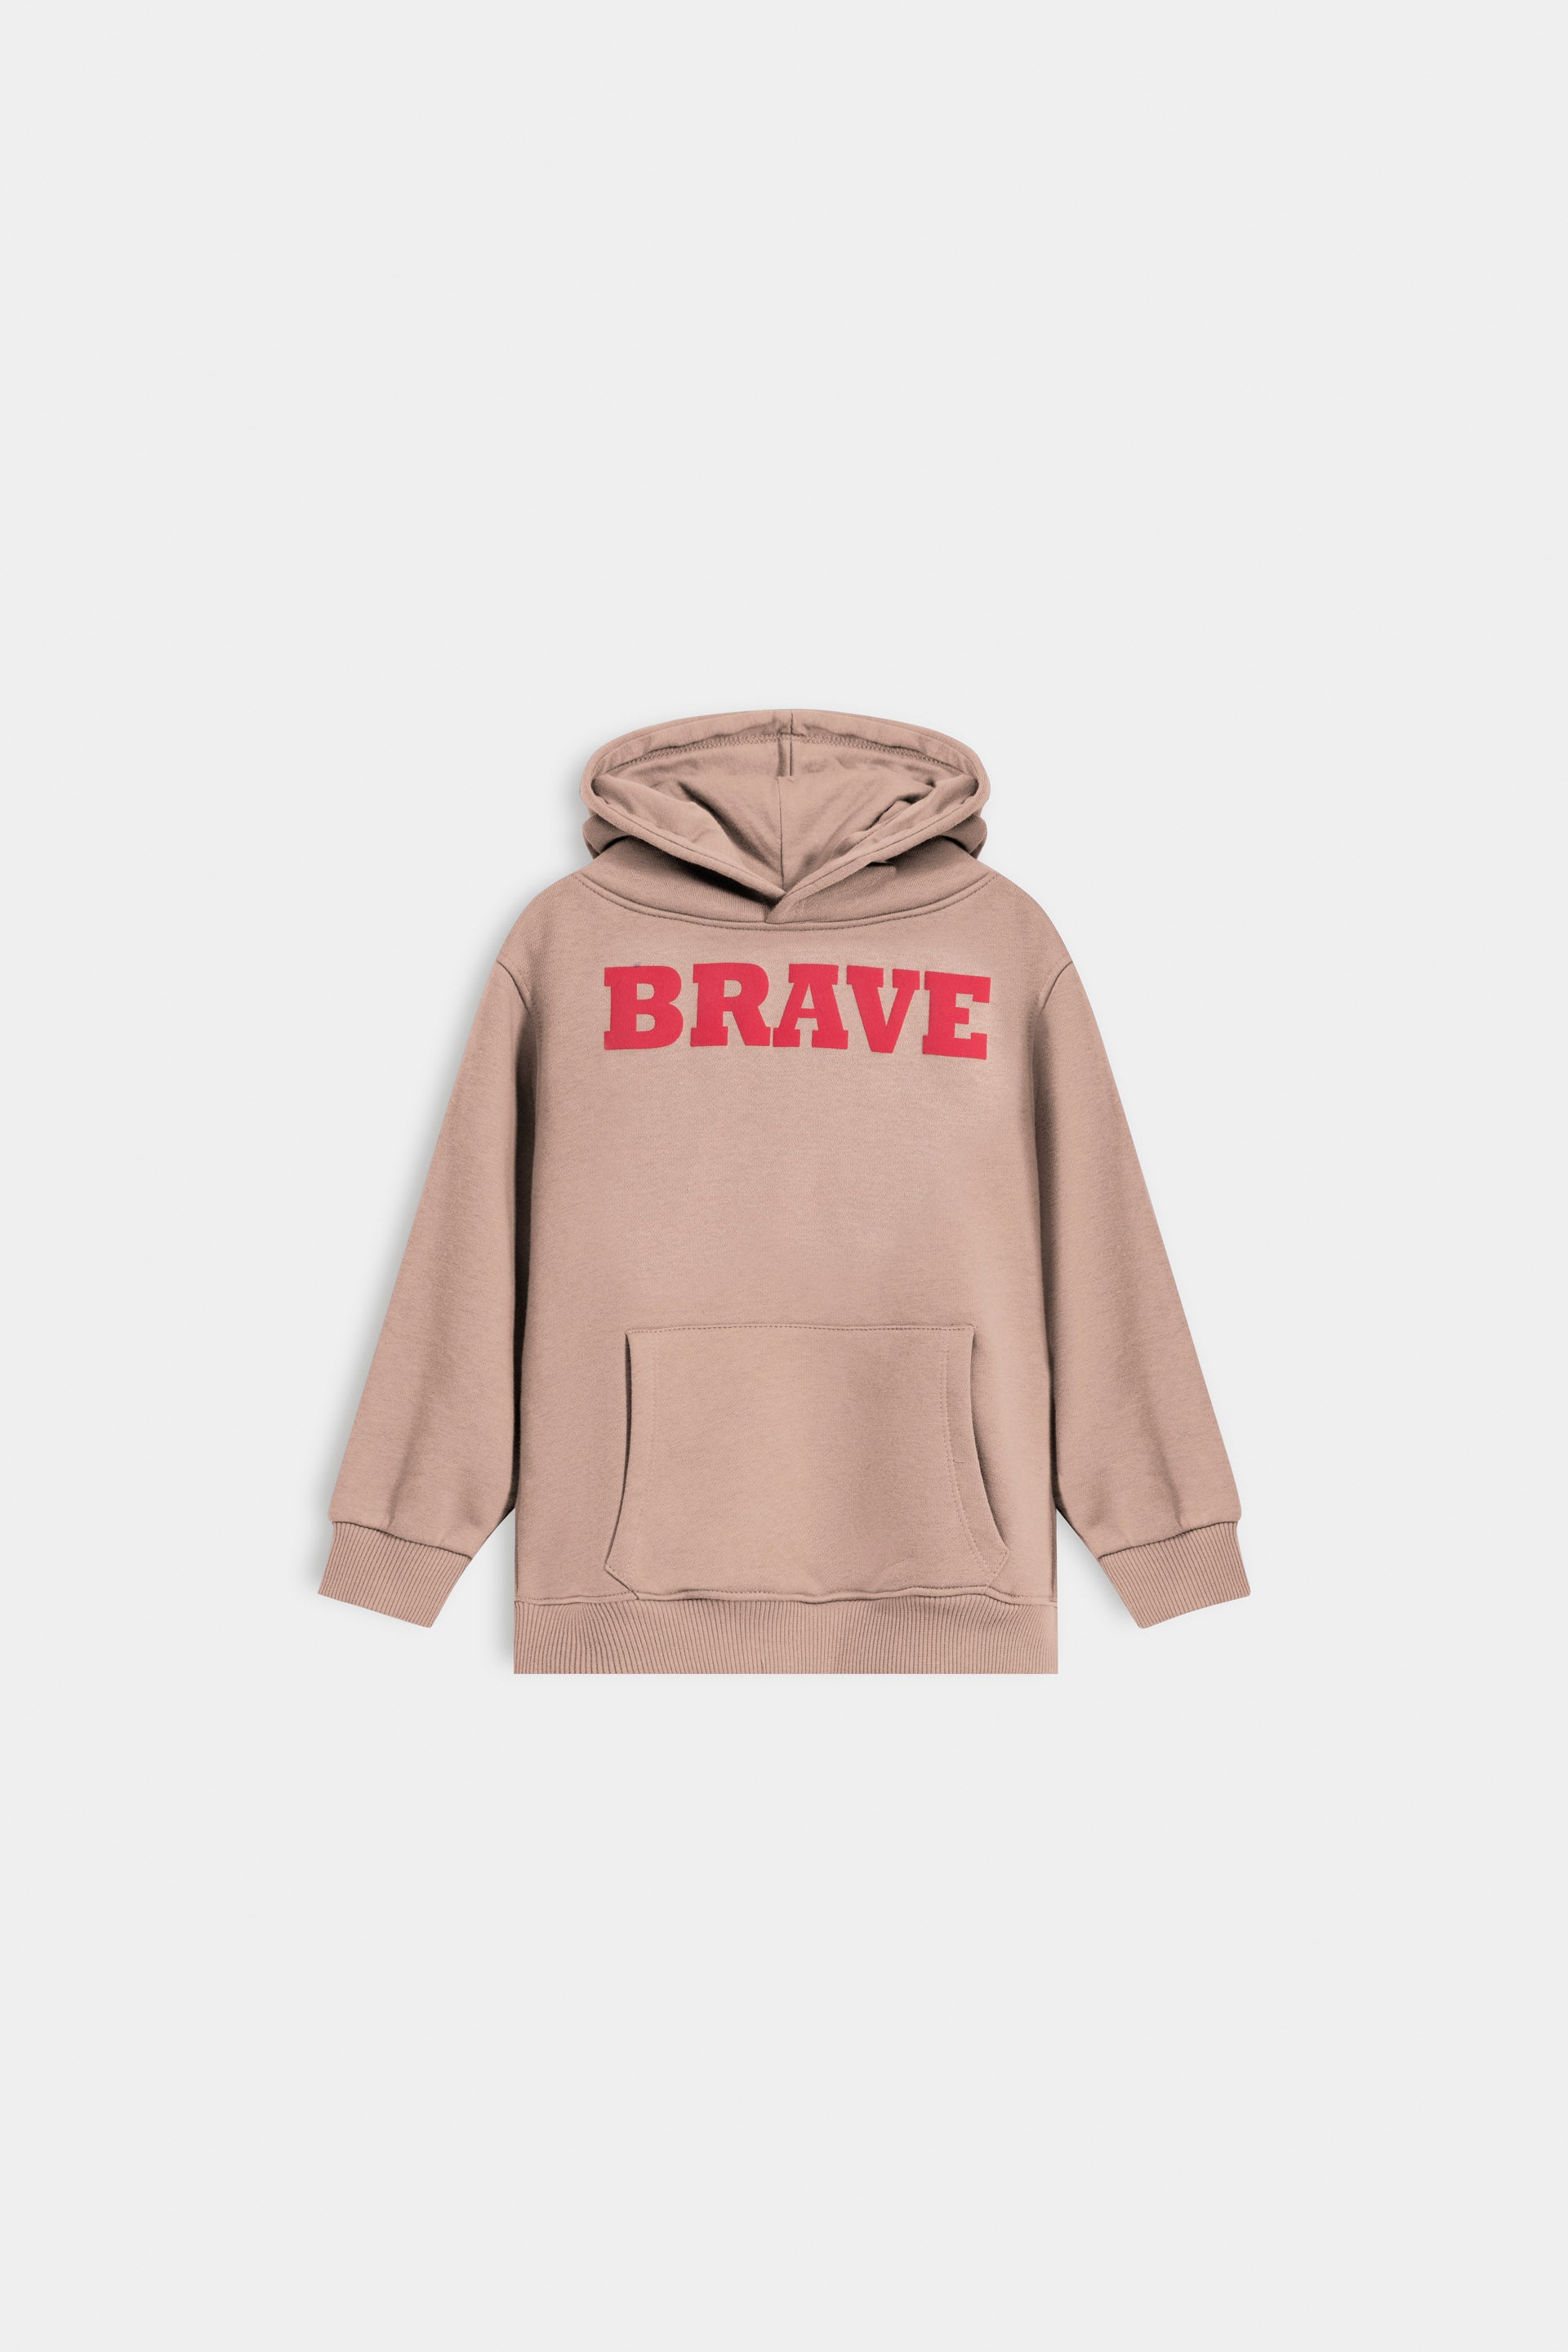 BRAVE Hoodie – Outfitters